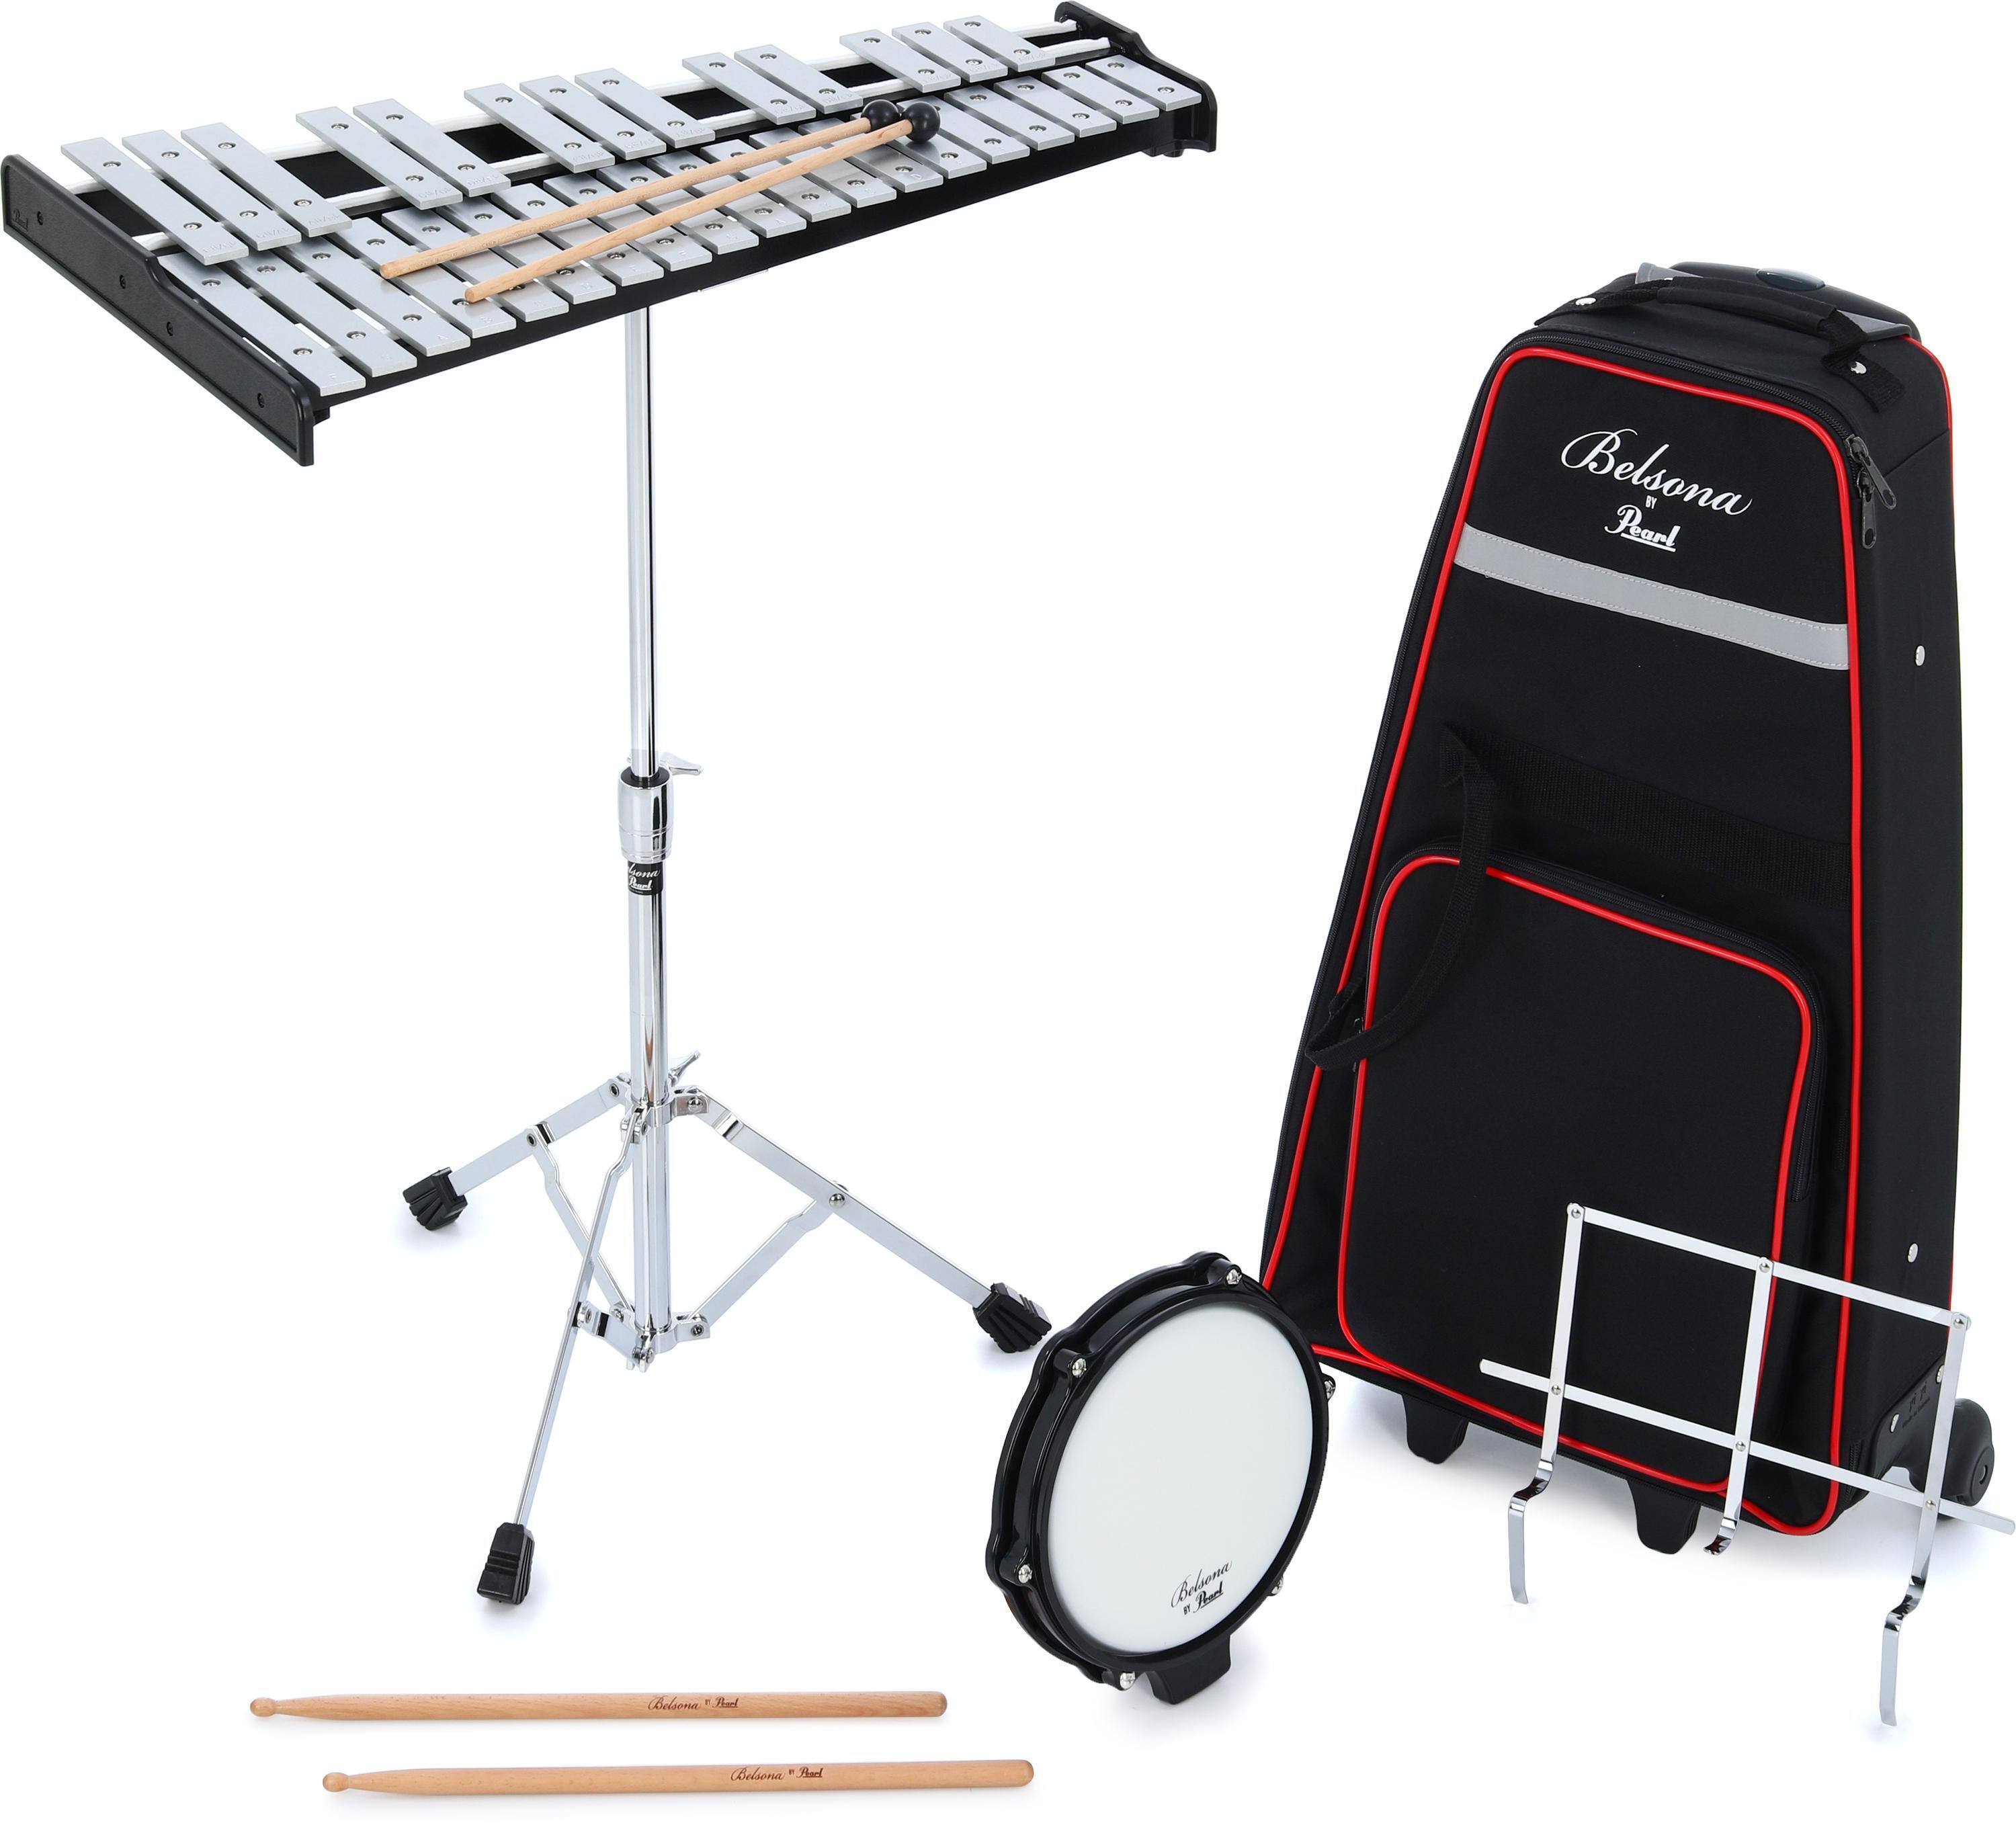 Xylophone Covers / Bags  Pearl Drums -Official site